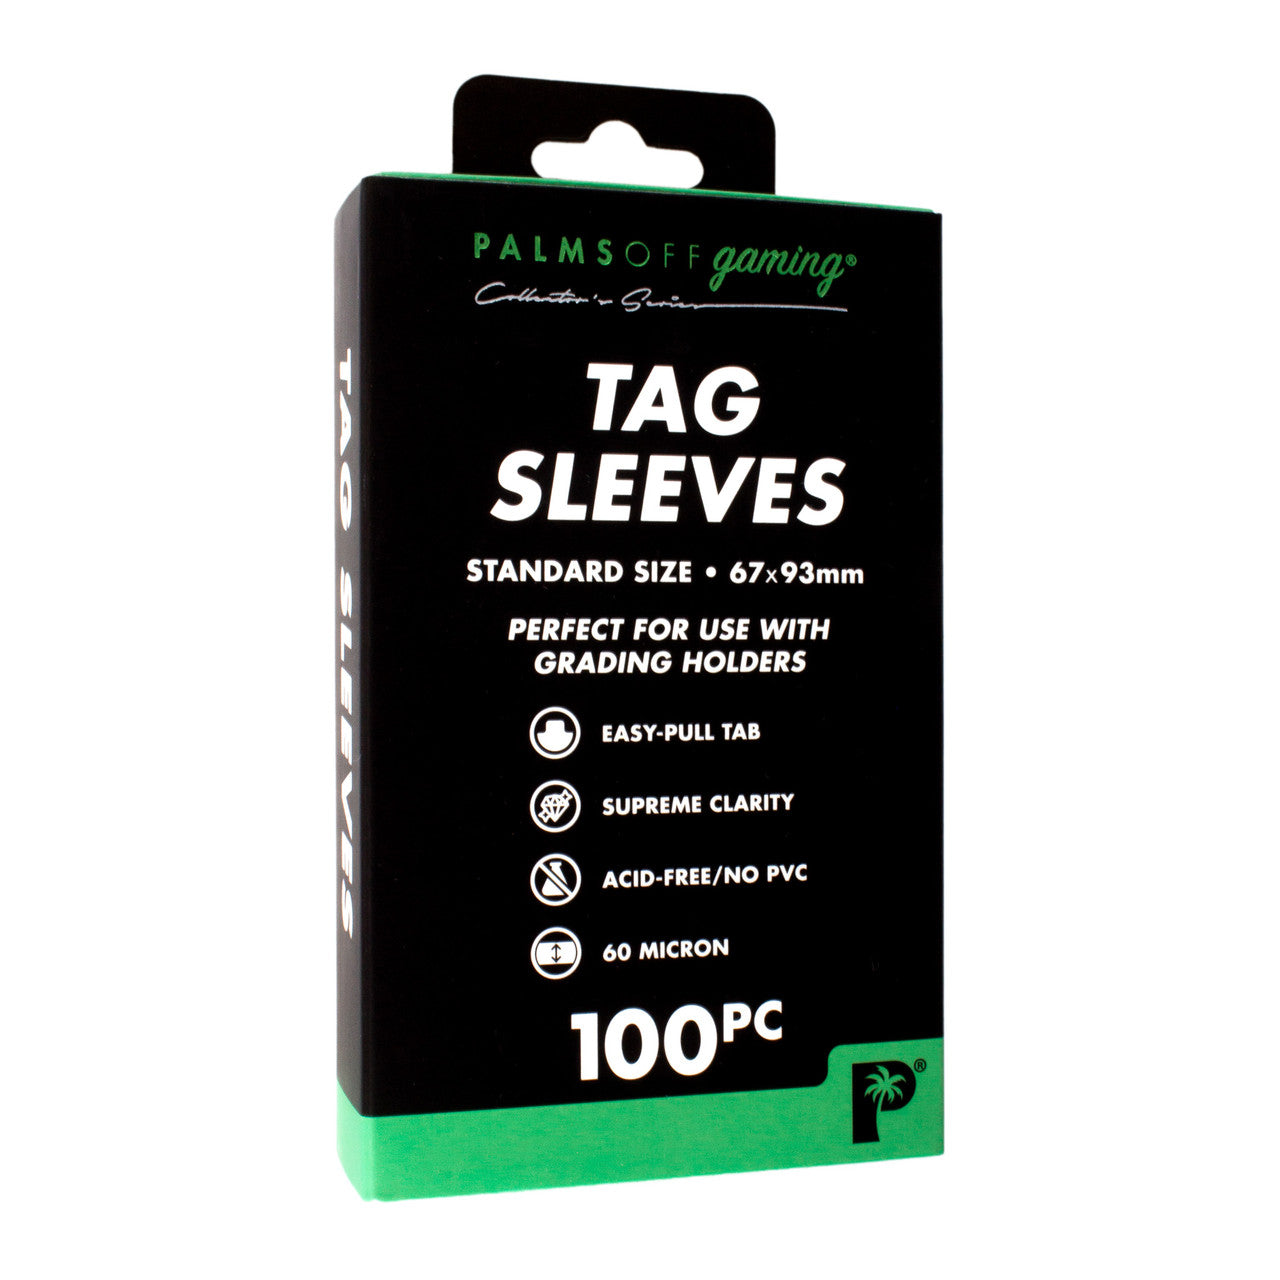 Palms Off Gaming - Tag Soft Sleeves (100pc)